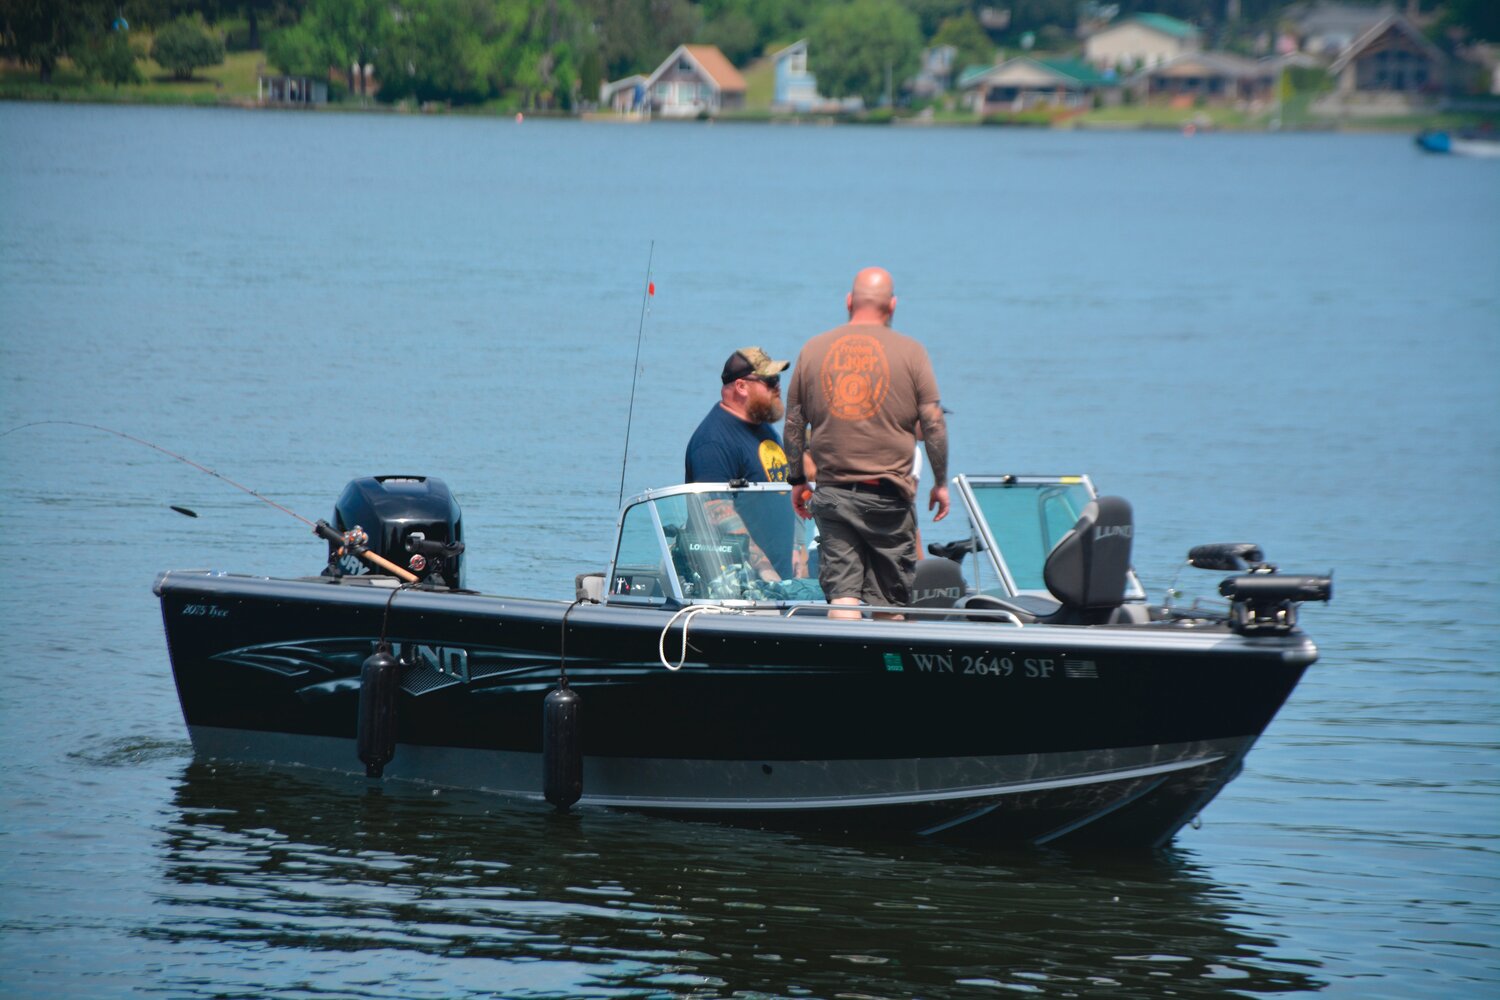 Participants take to the water to learn how to fish at Lake Lawrence on Saturday, May 20.